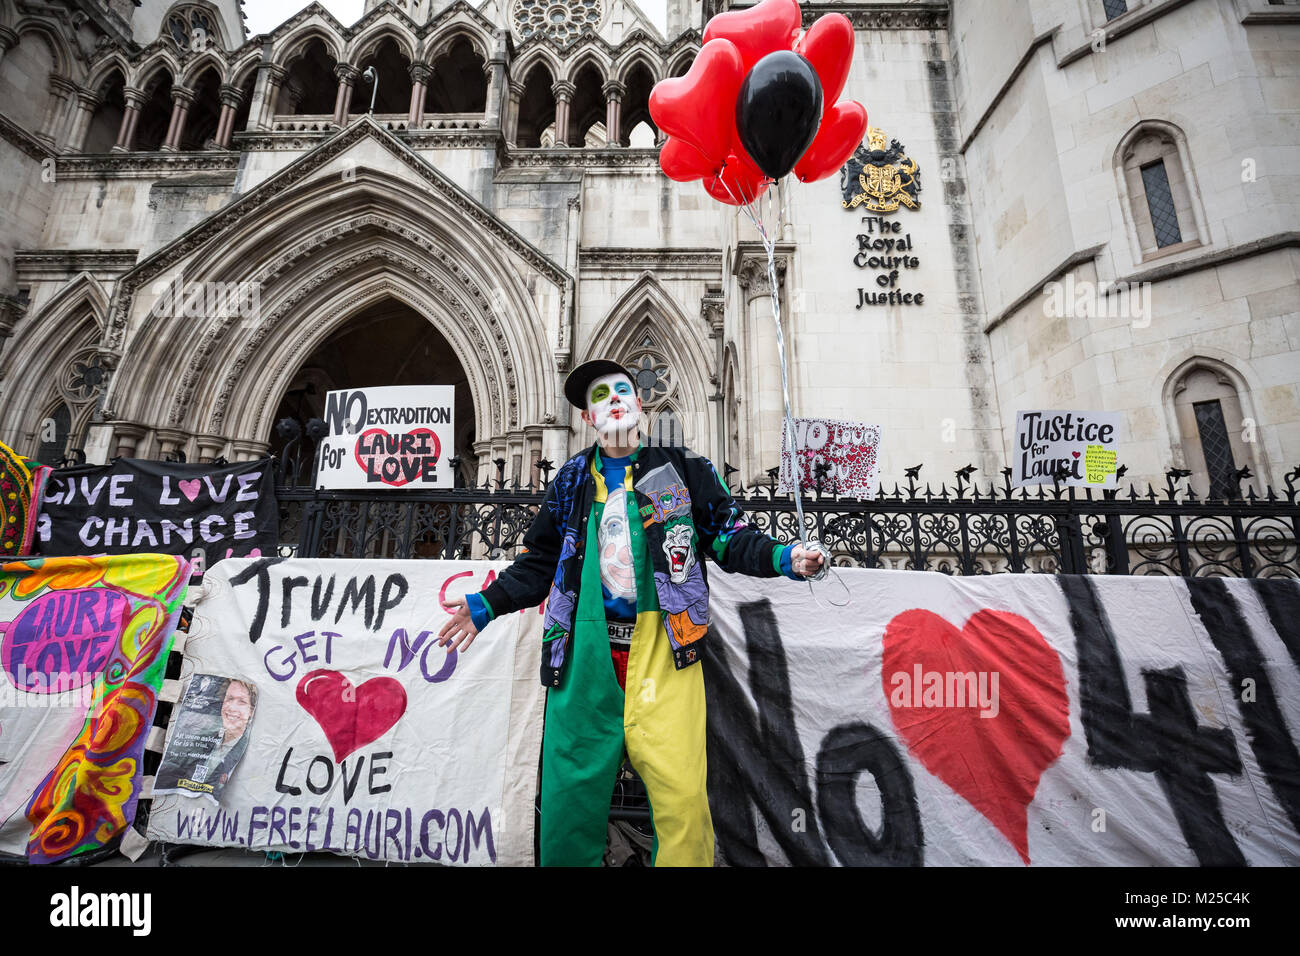 London, UK. 5th Feb, 2018. Supporters of Lauri Love outside The Royal Courts of Justice on the day of his extradition verdict. Love is charged with masterminding a 2013 cyber-attack by Anonymous on US government websites. Credit: Guy Corbishley/Alamy Live News Stock Photo